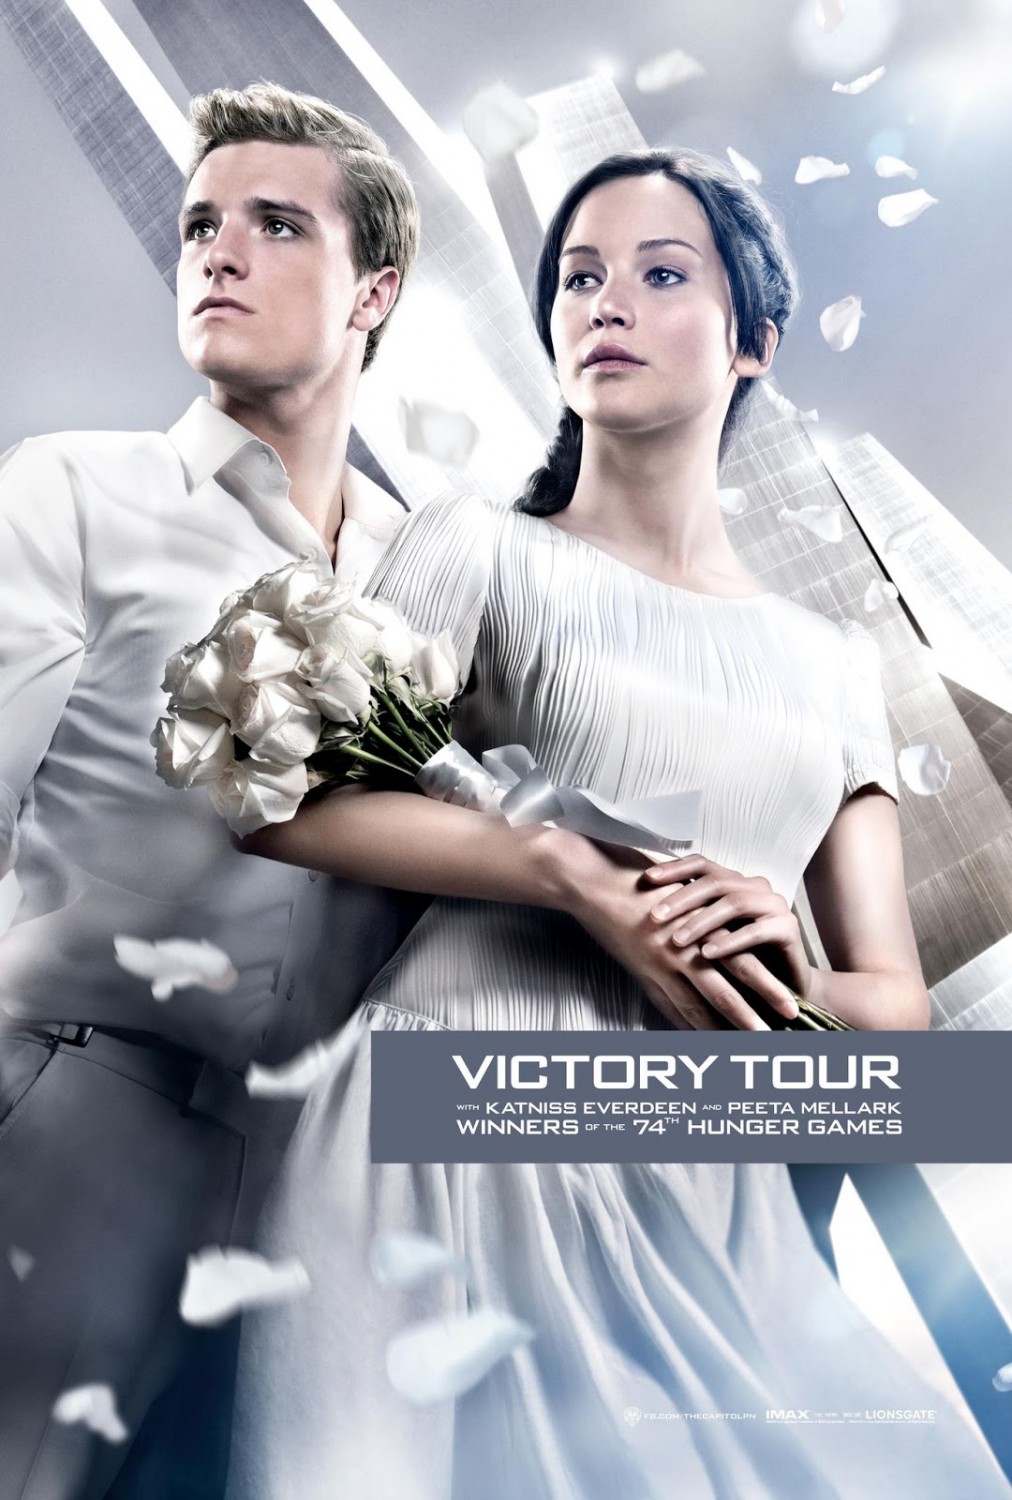 Hunger Games Catching Fire Classic Large Movie Poster Print A0 A1 A2 A3 A4 Maxi